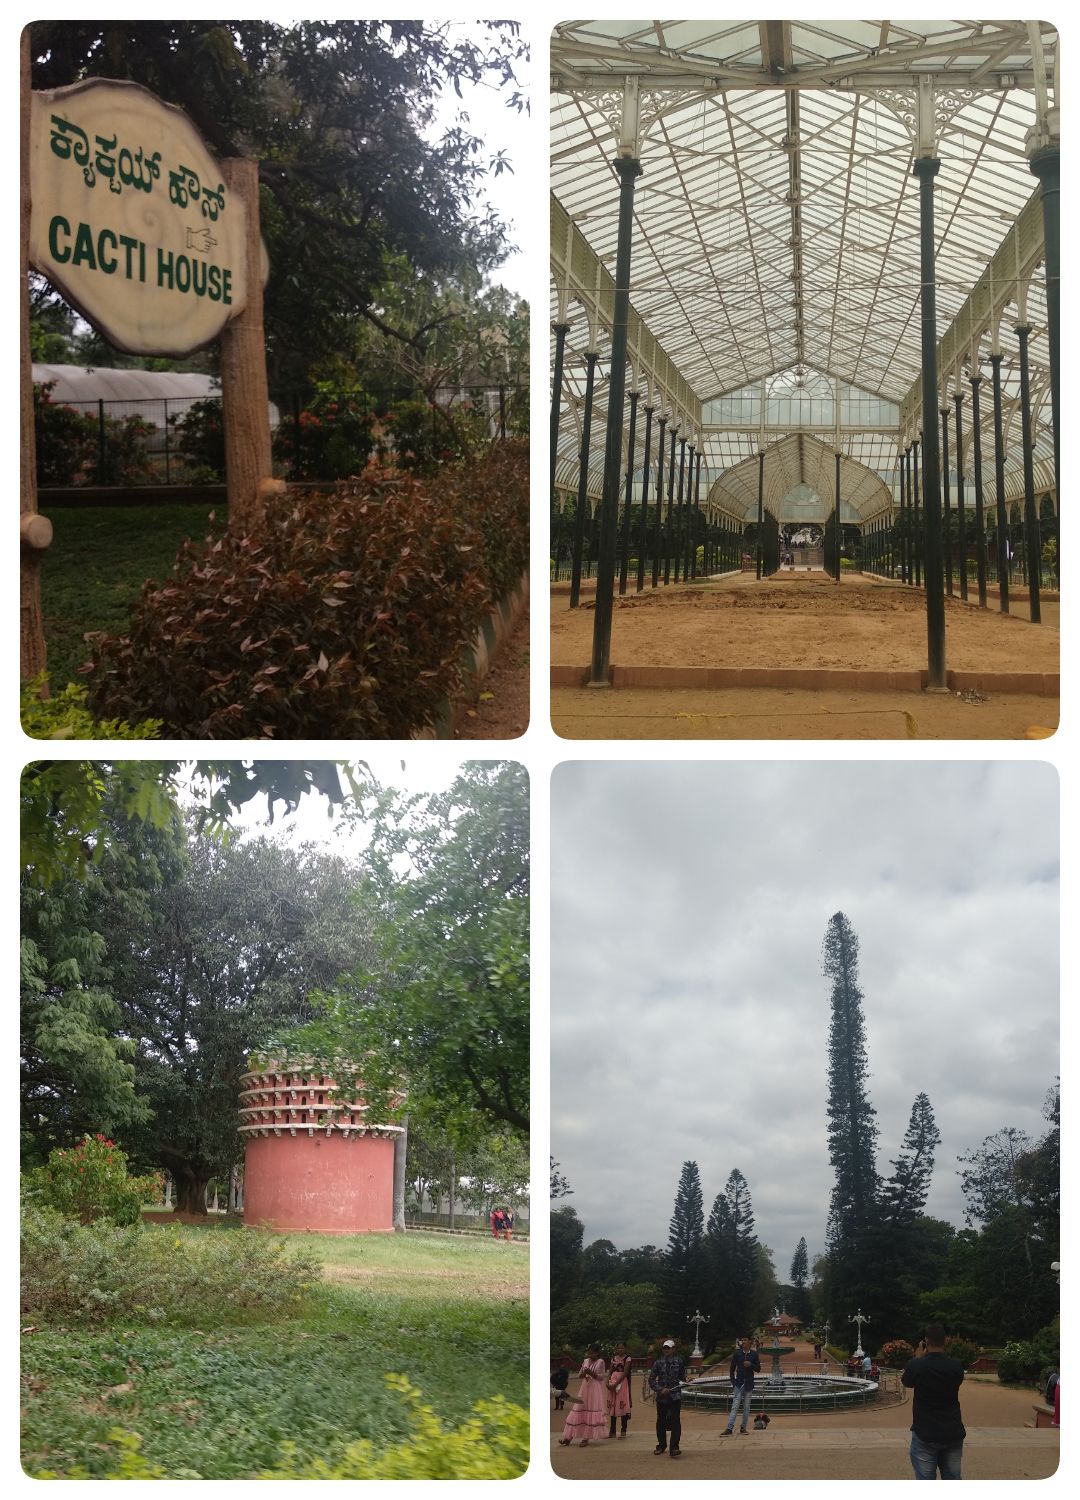 Places seen during the ride